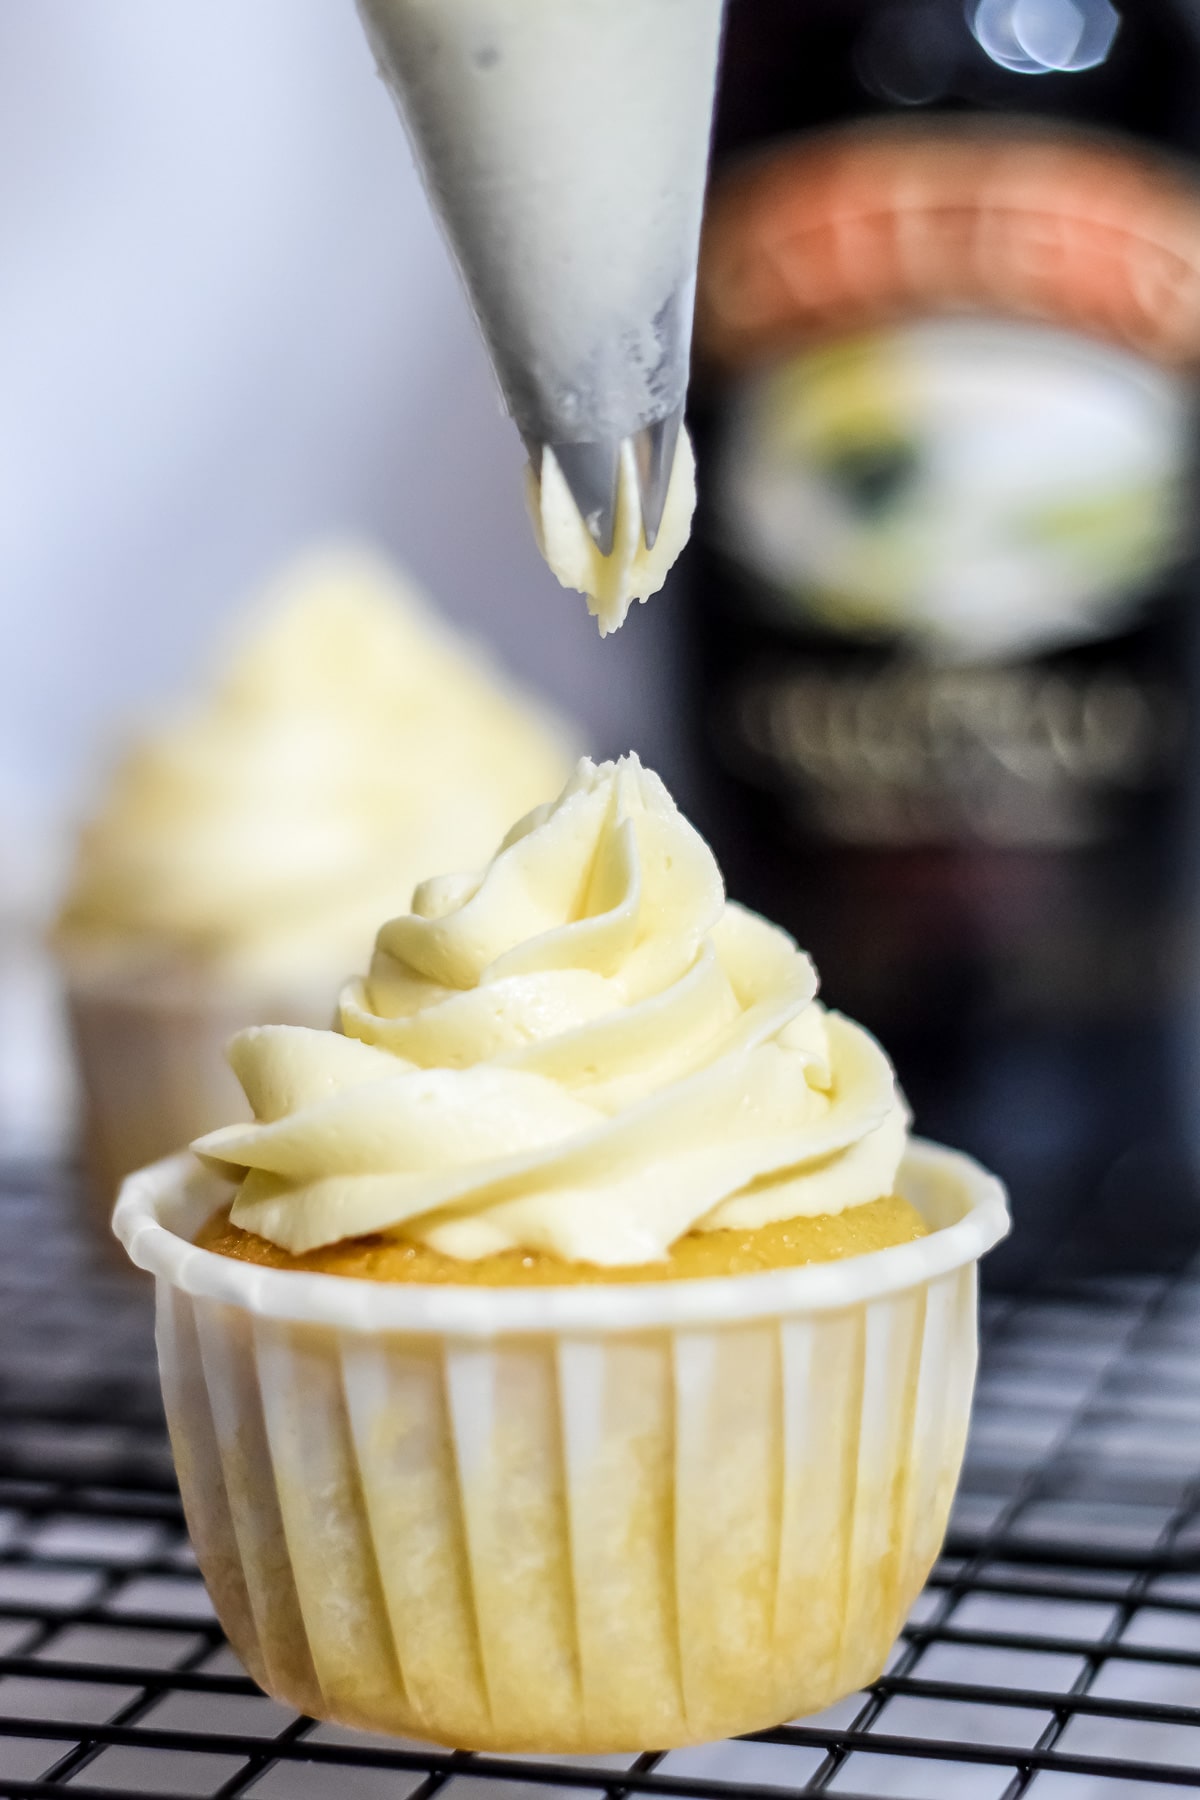 Irish cream frosting piped onto a cupcake with Baileys bottle behind